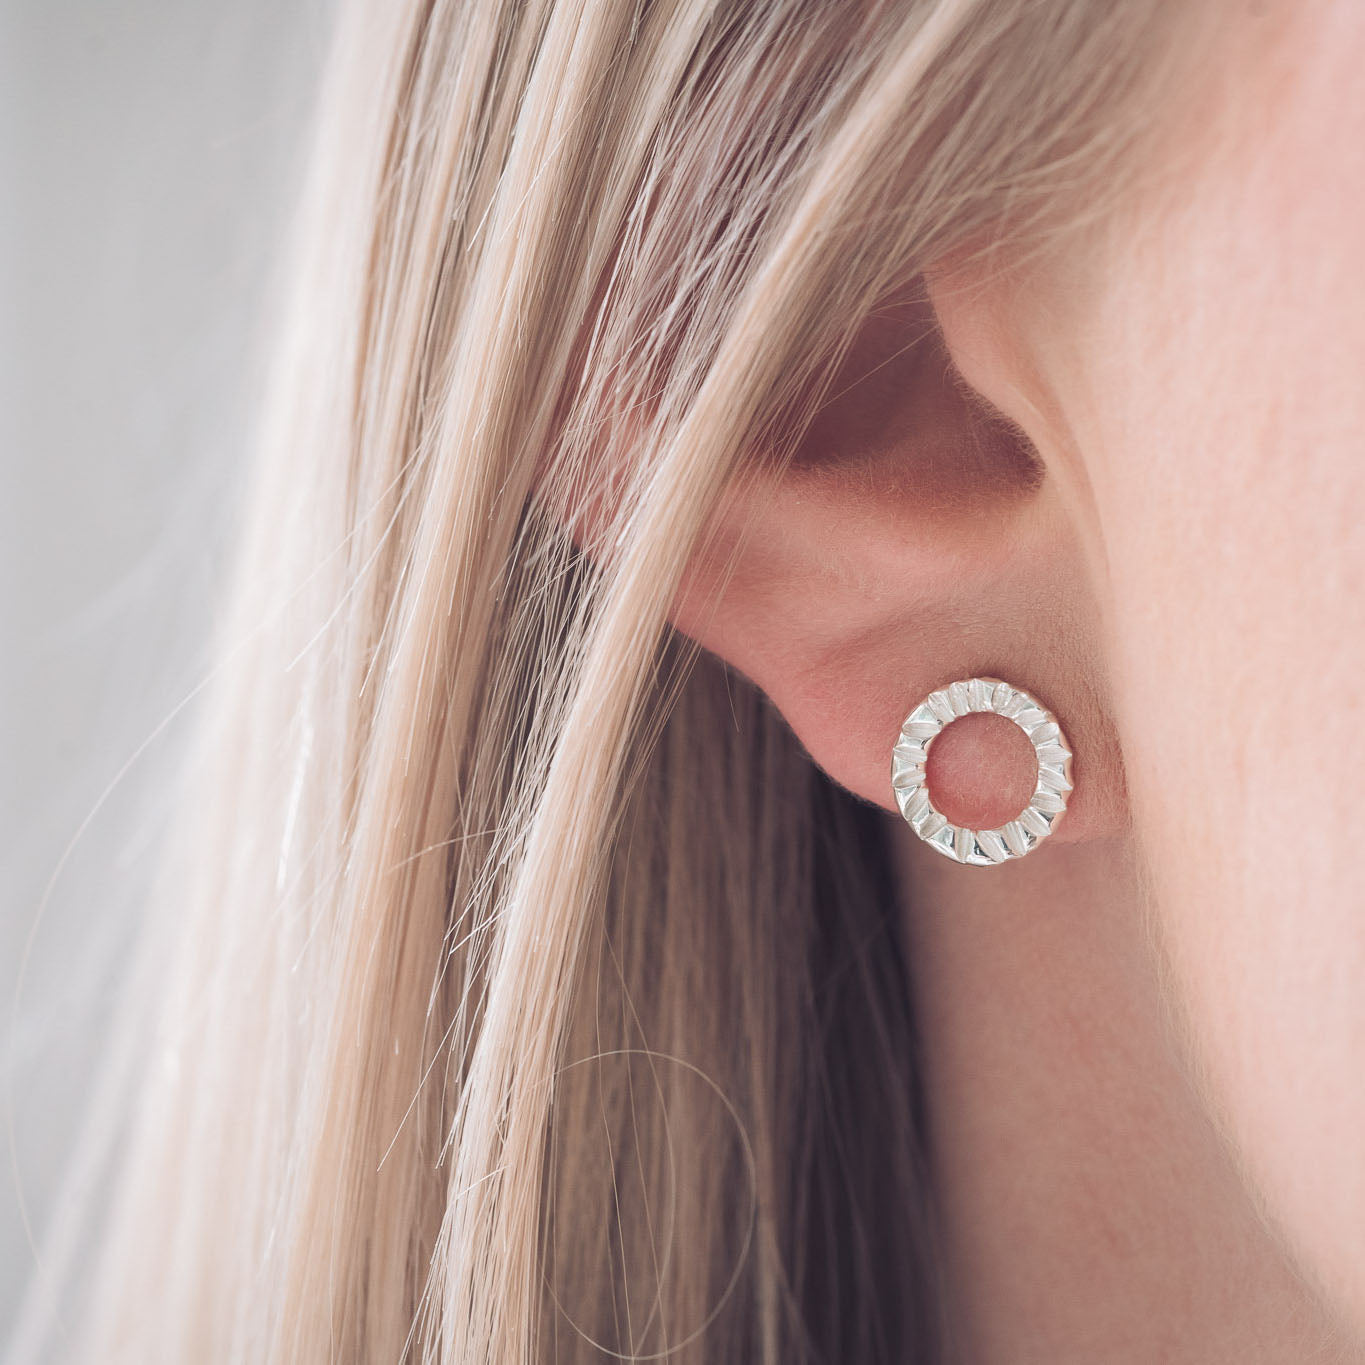 Handcrafted Round Textured Silver Elena Stud Earrings